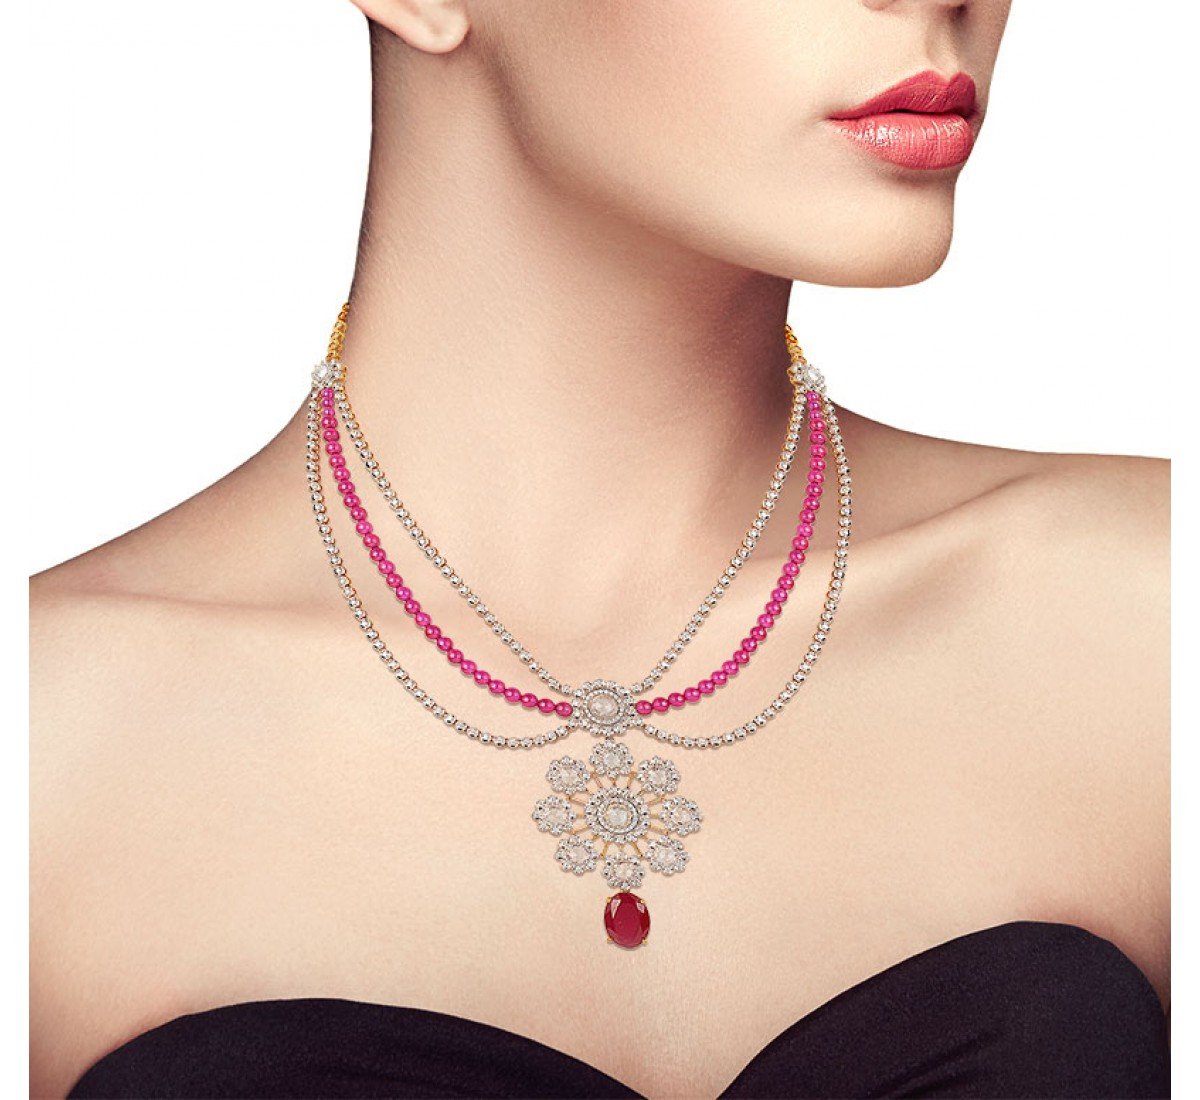 Buy High End Diamond Necklace At Best Price